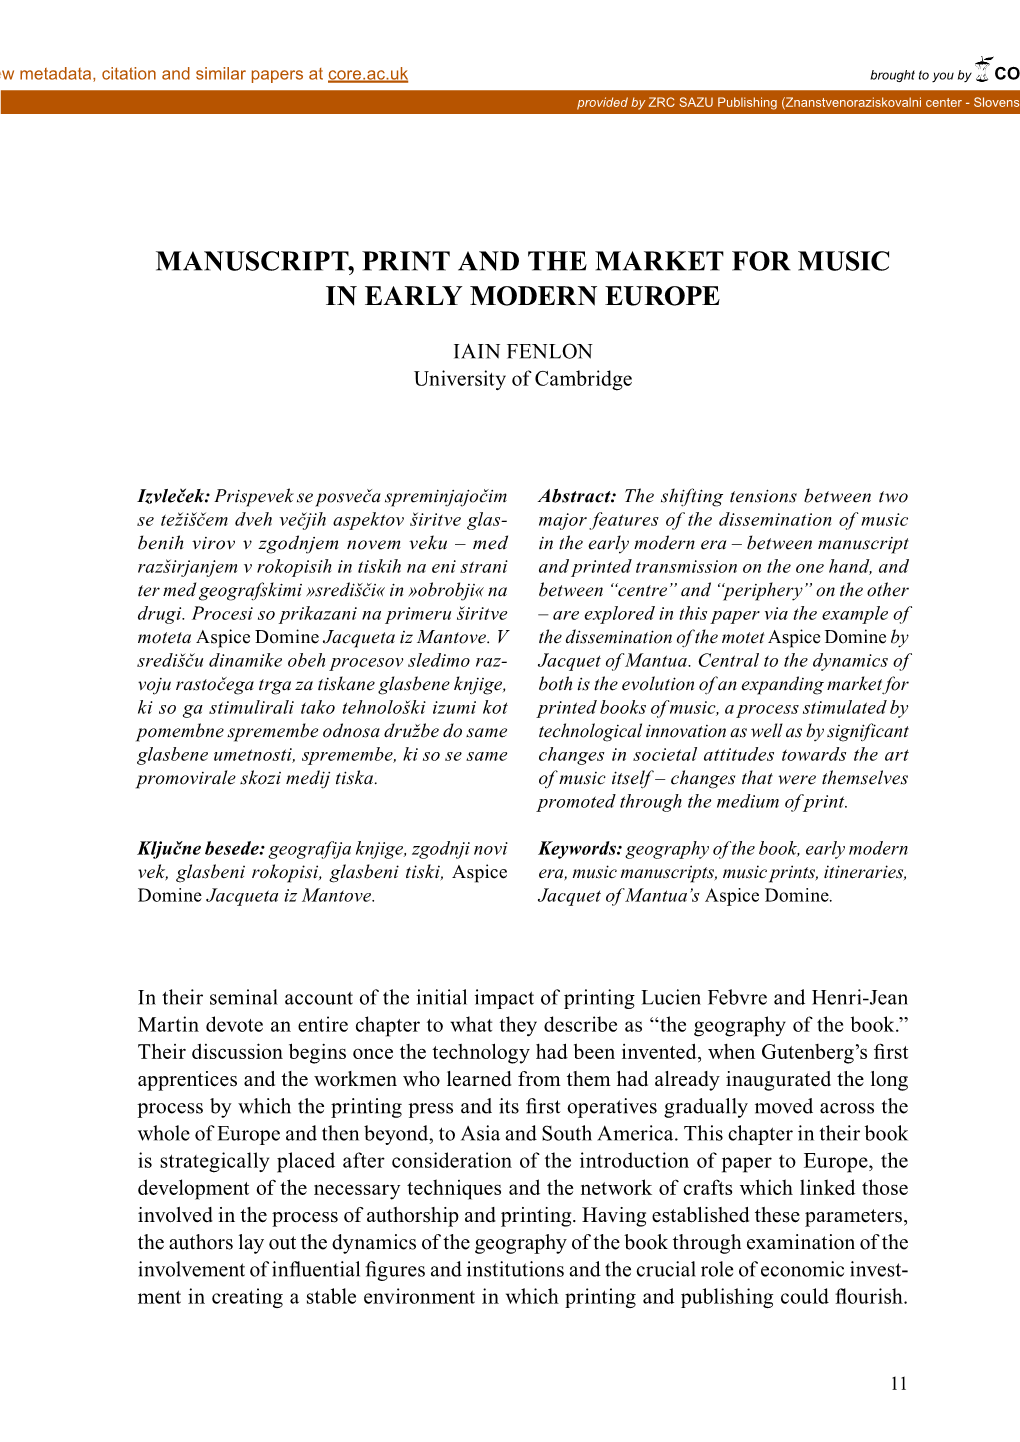 Manuscript, Print and the Market for Music in Early Modern Europe